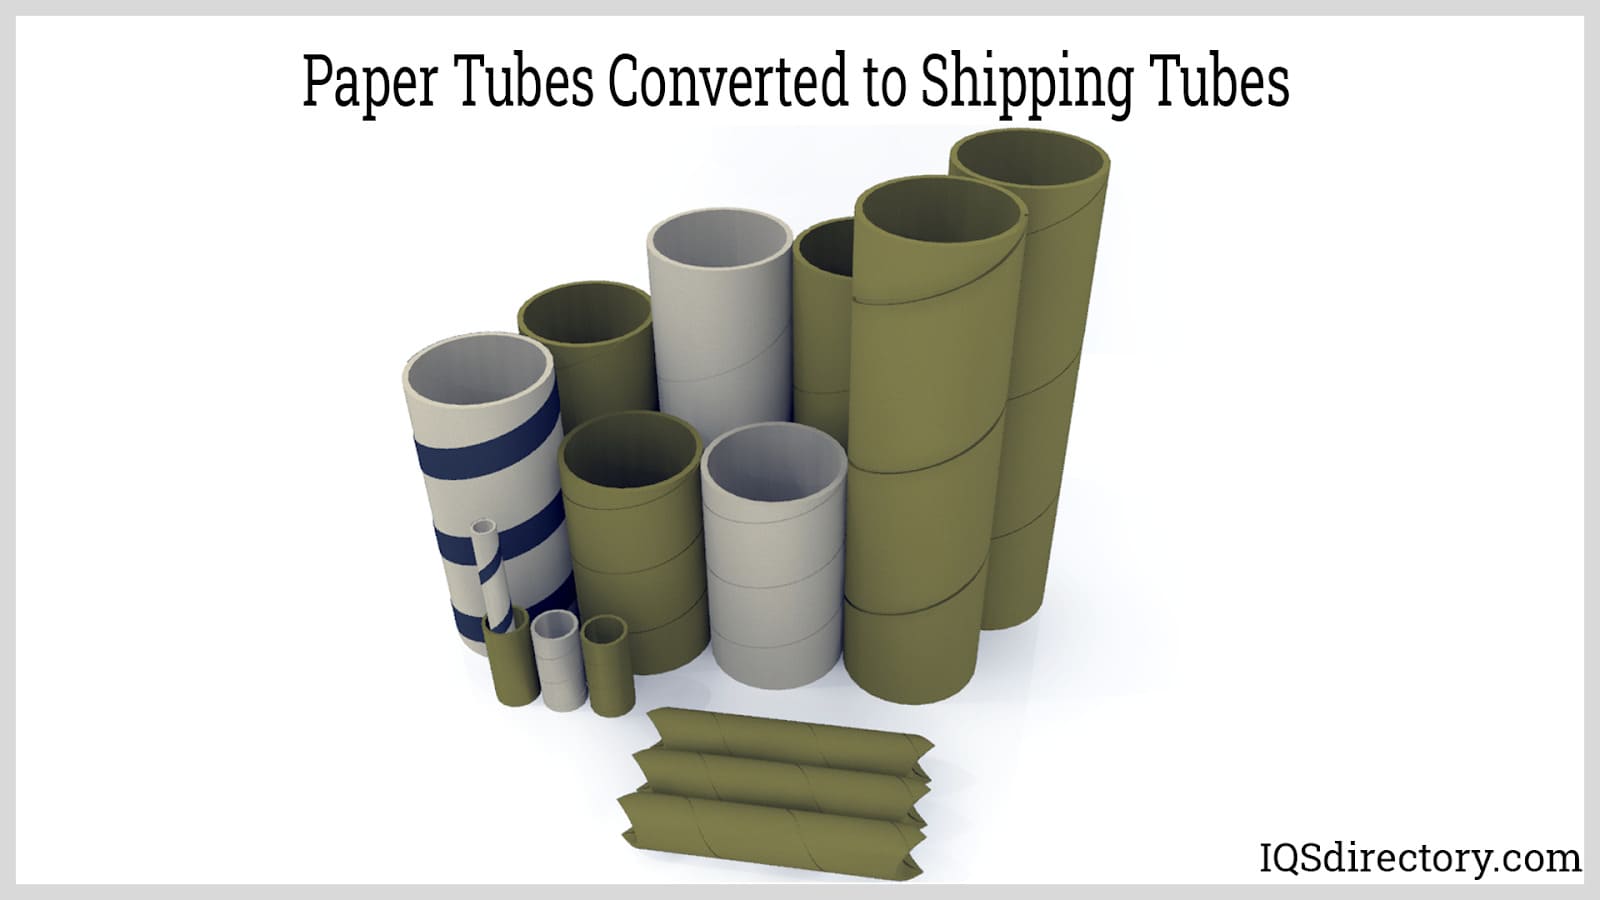 Paper Tubes Converted to Shipping Tubes